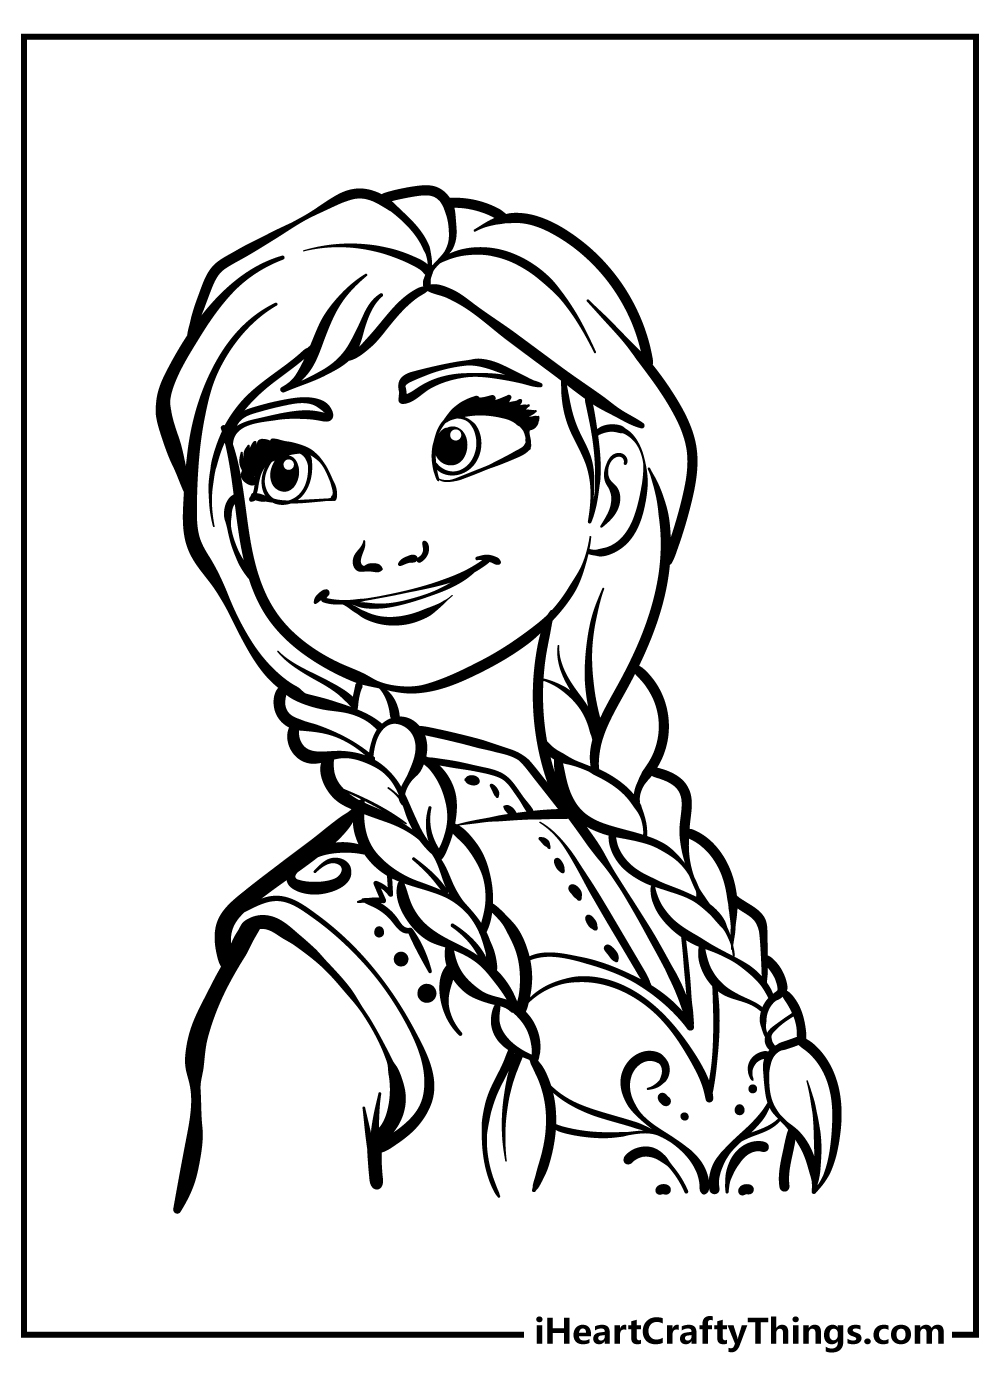 Frozen Coloring Pages for kids free download